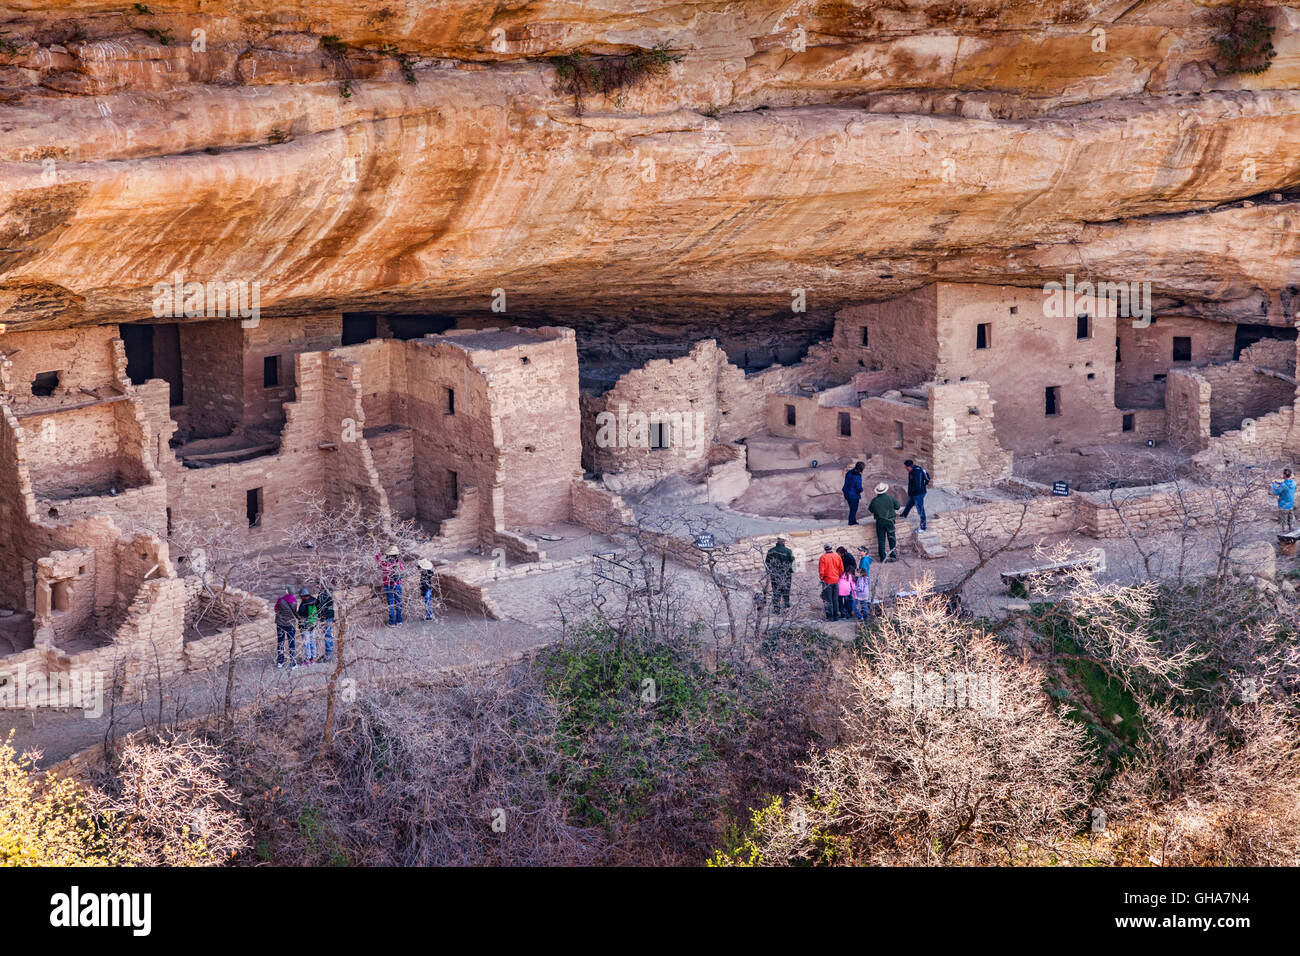 Visitors at Spruce House a cliff dwelling in Mesa Verde National Park, Colorado, USA Stock Photo